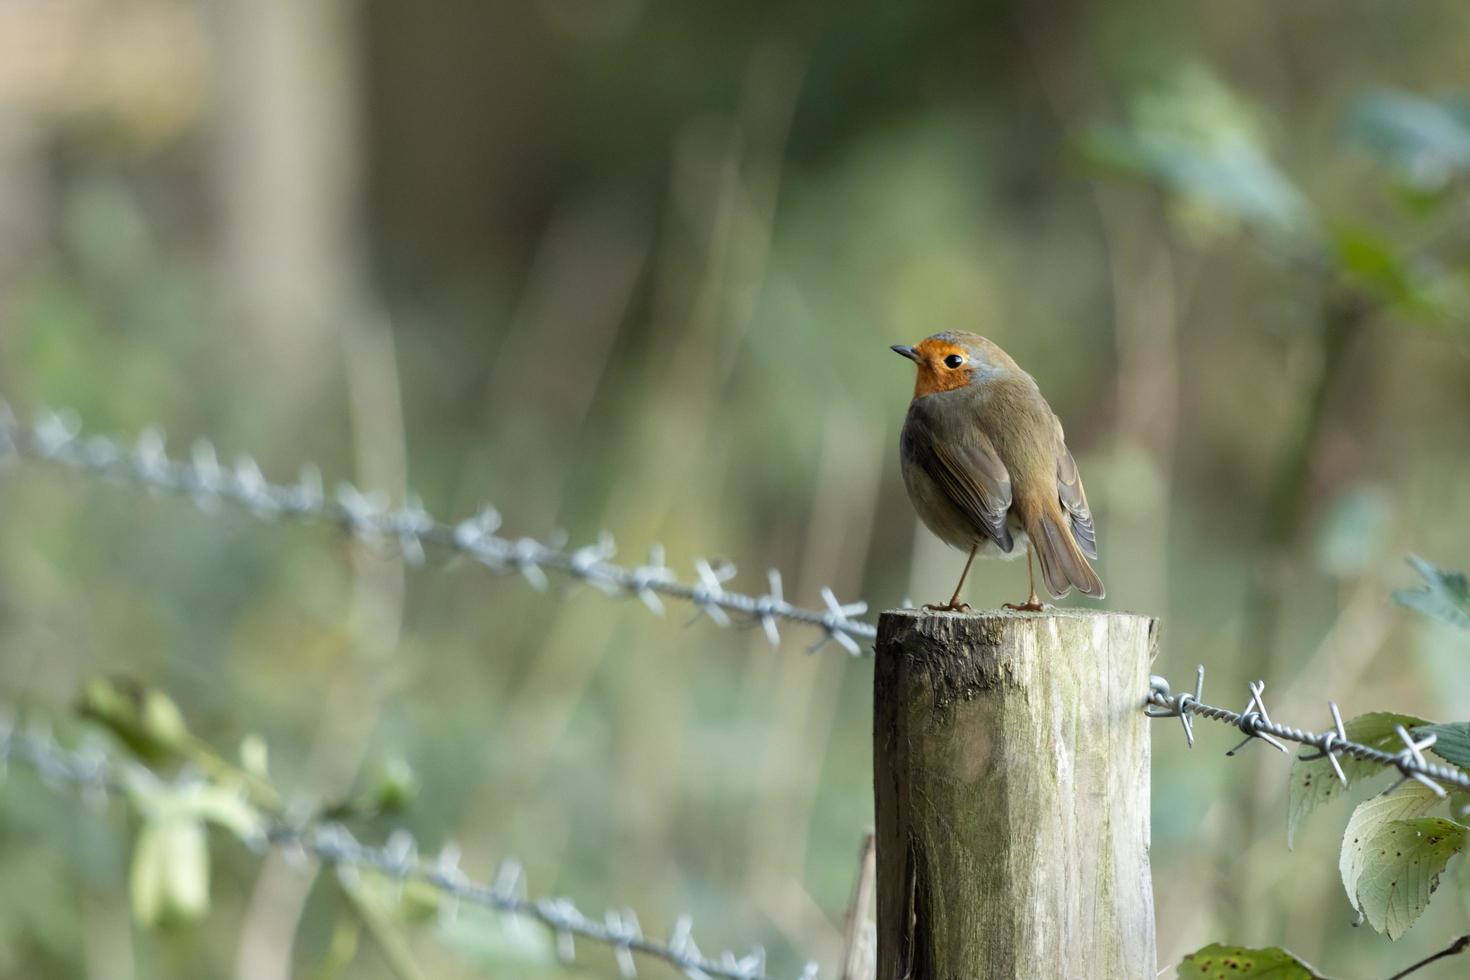 Robin standing on a wooden fence post photo